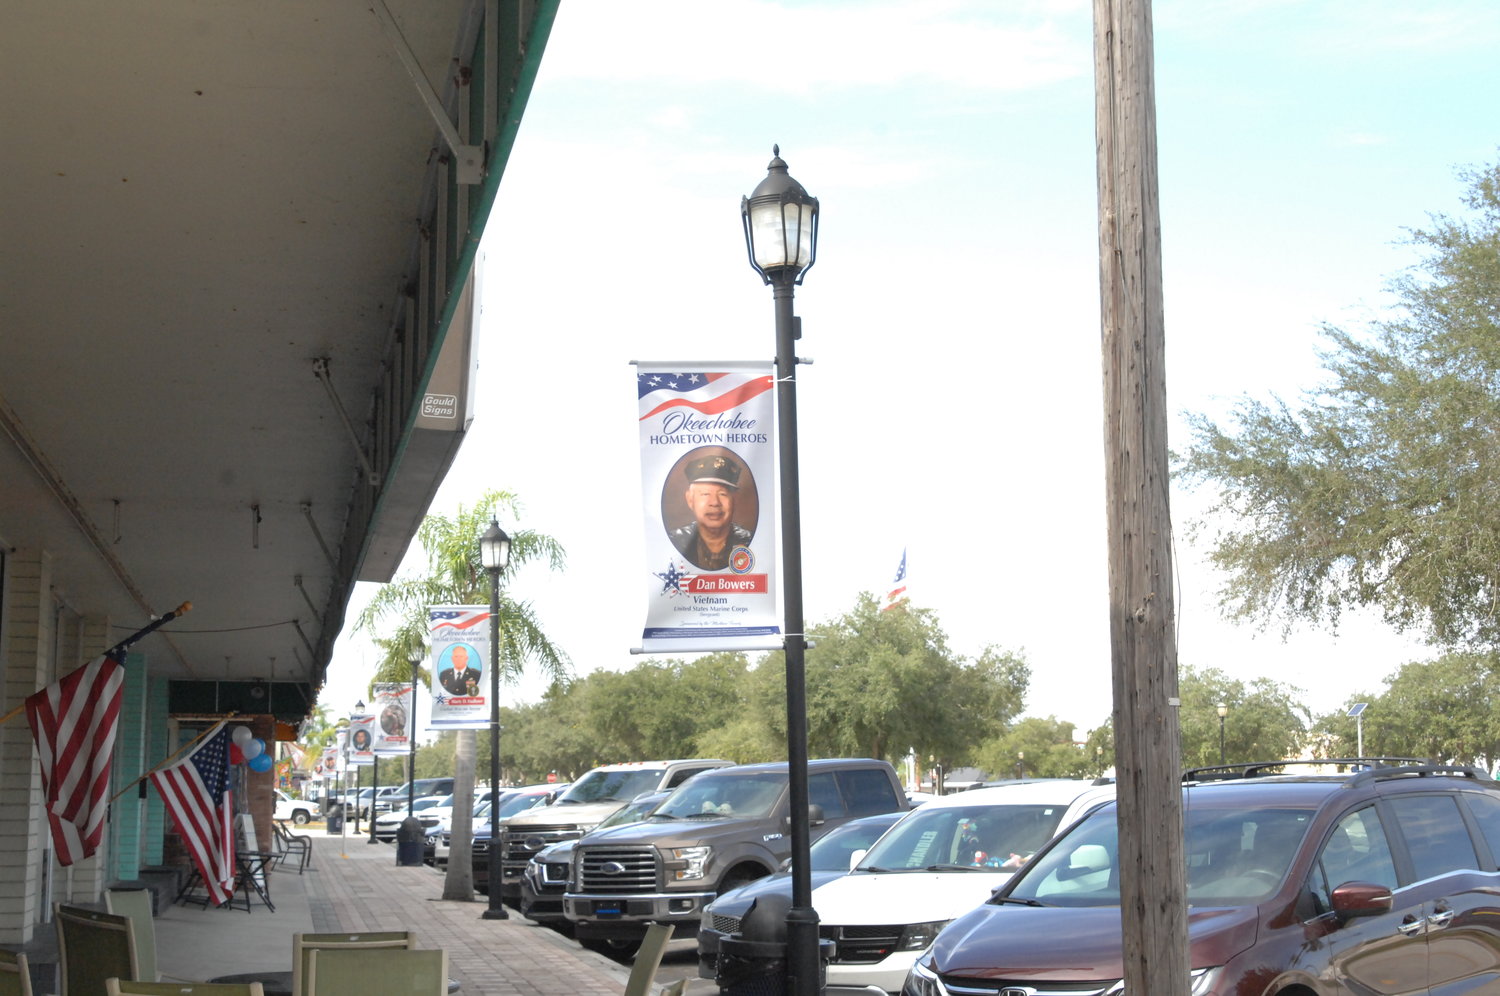 Okeechobee Main Street sponsored a program to honor local veterans with banners on the light poles.